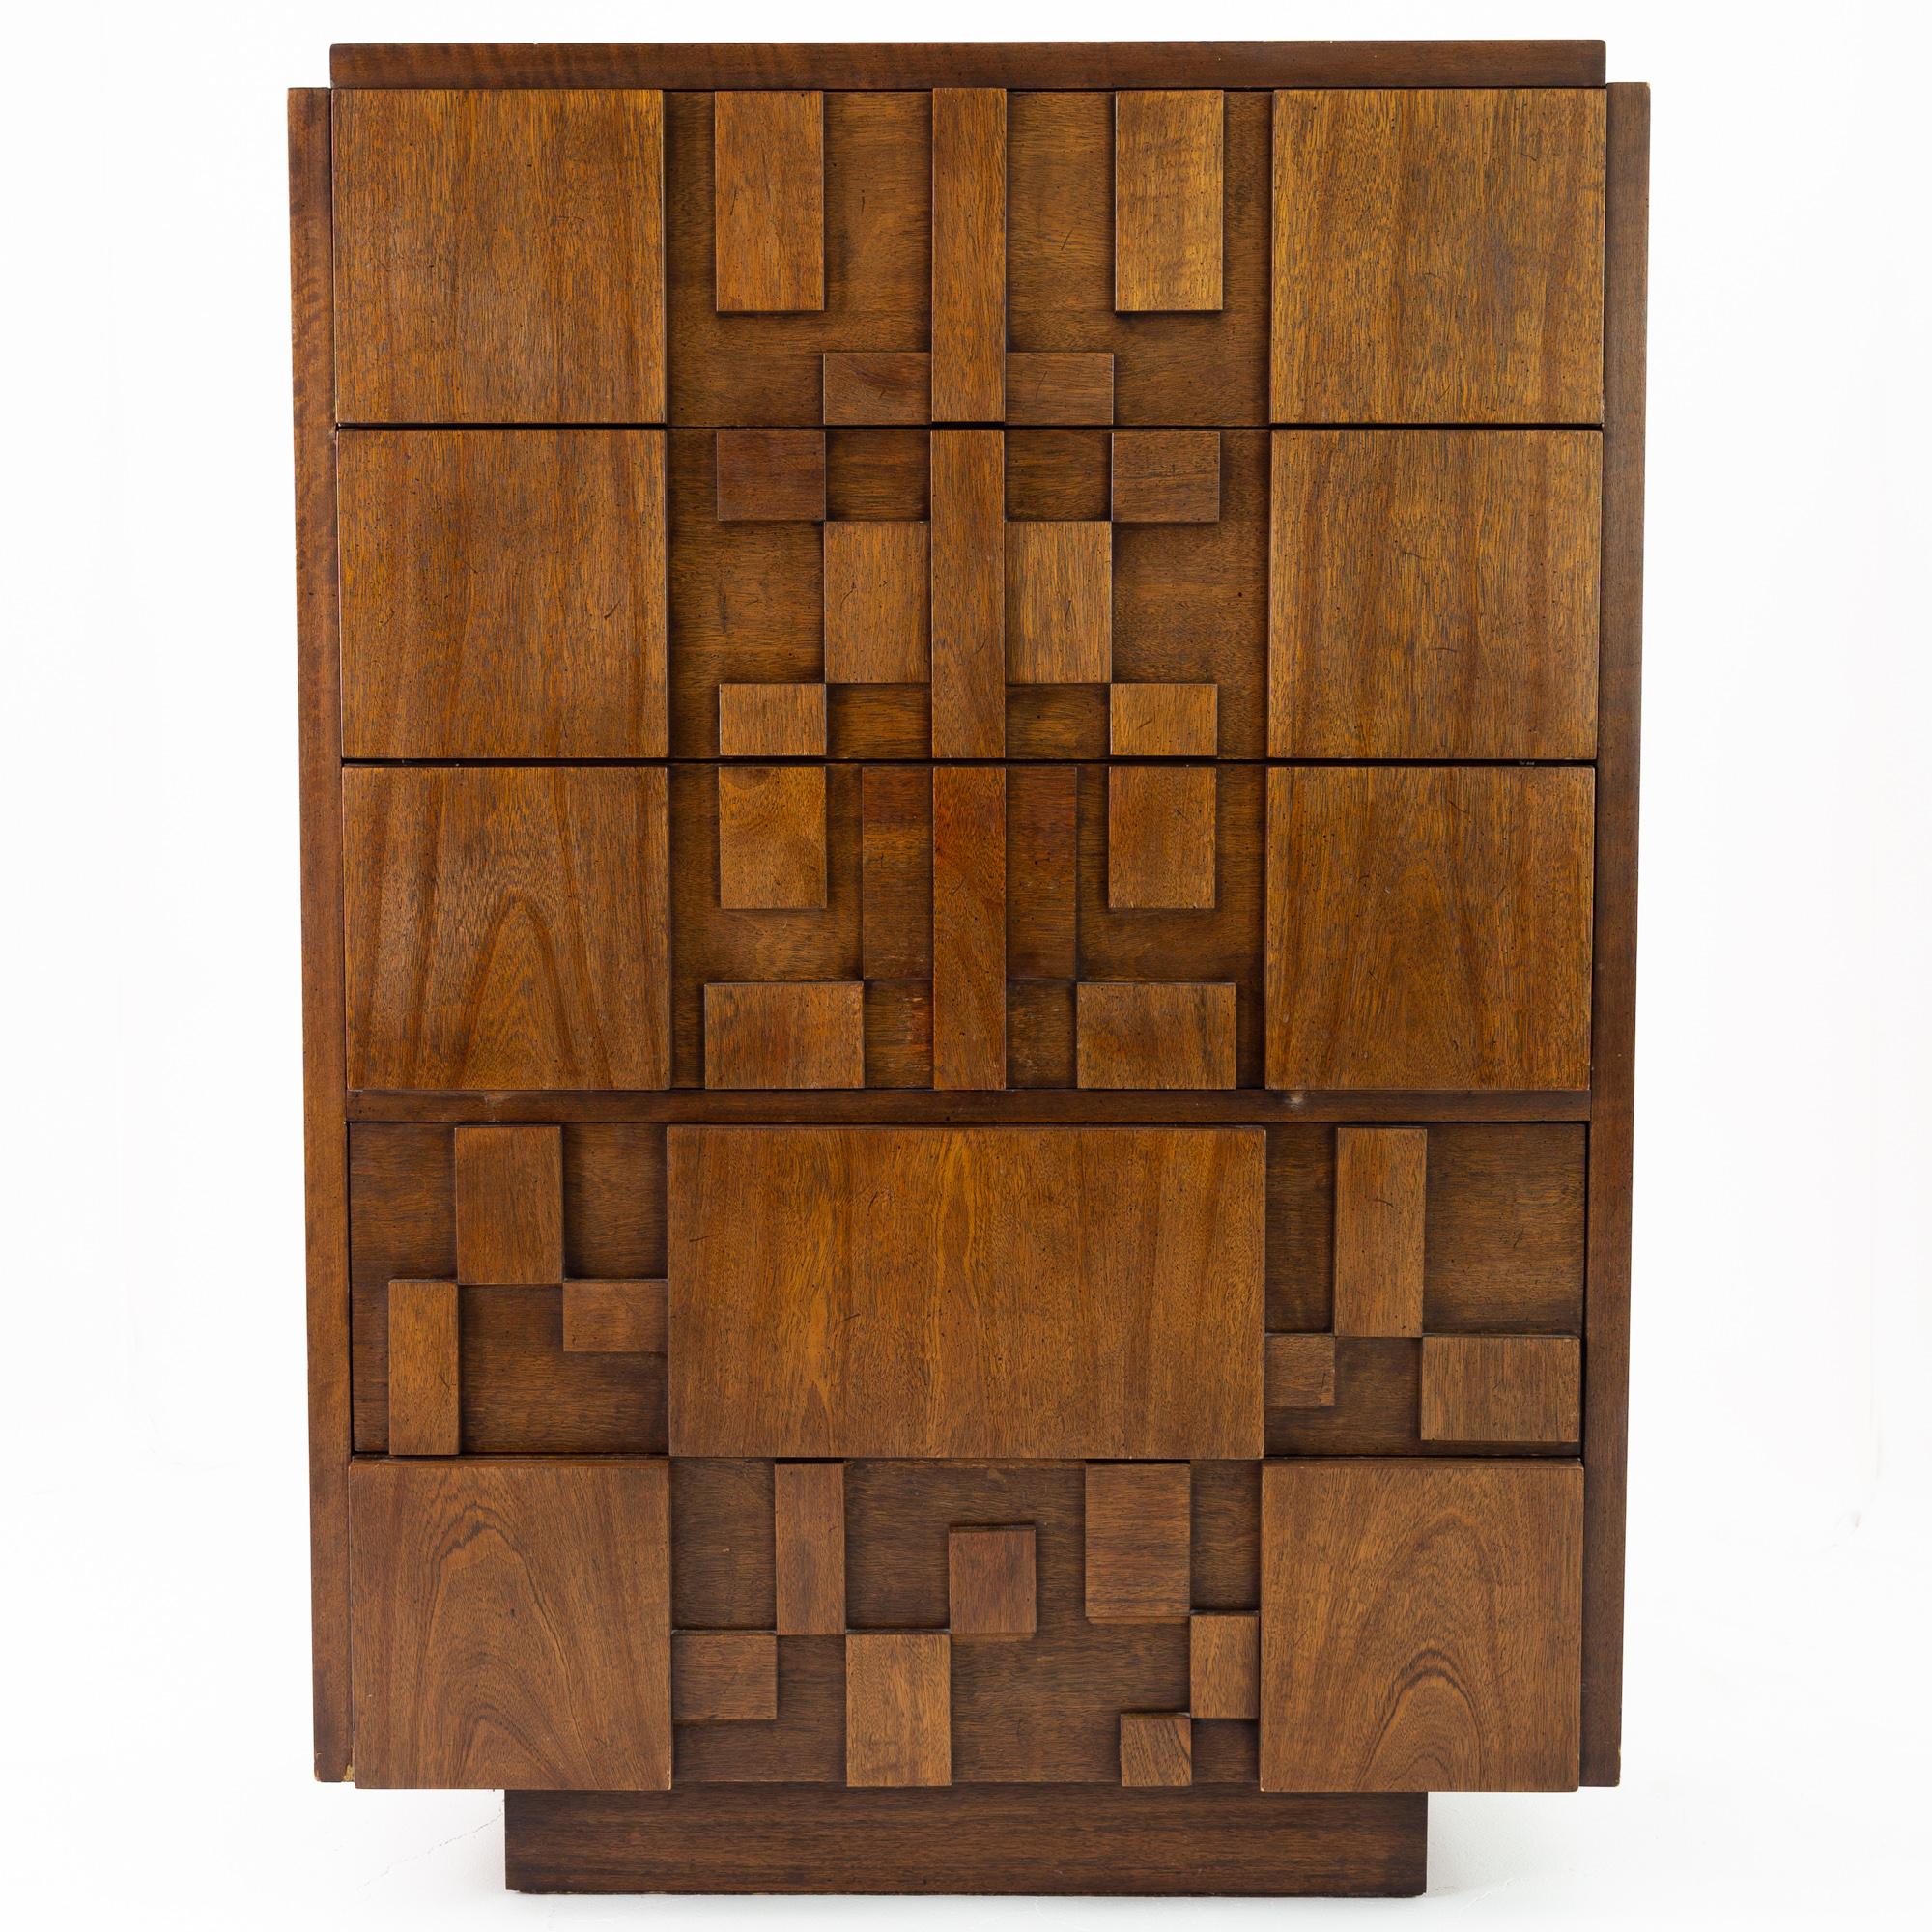 Lane staccato Brutalist mid century walnut 5 drawer highboy dresser gentleman's chest armoire
Armoire measures: 38 wide x 19 deep x 54 inches high

?All pieces of furniture can be had in what we call restored vintage condition. That means the